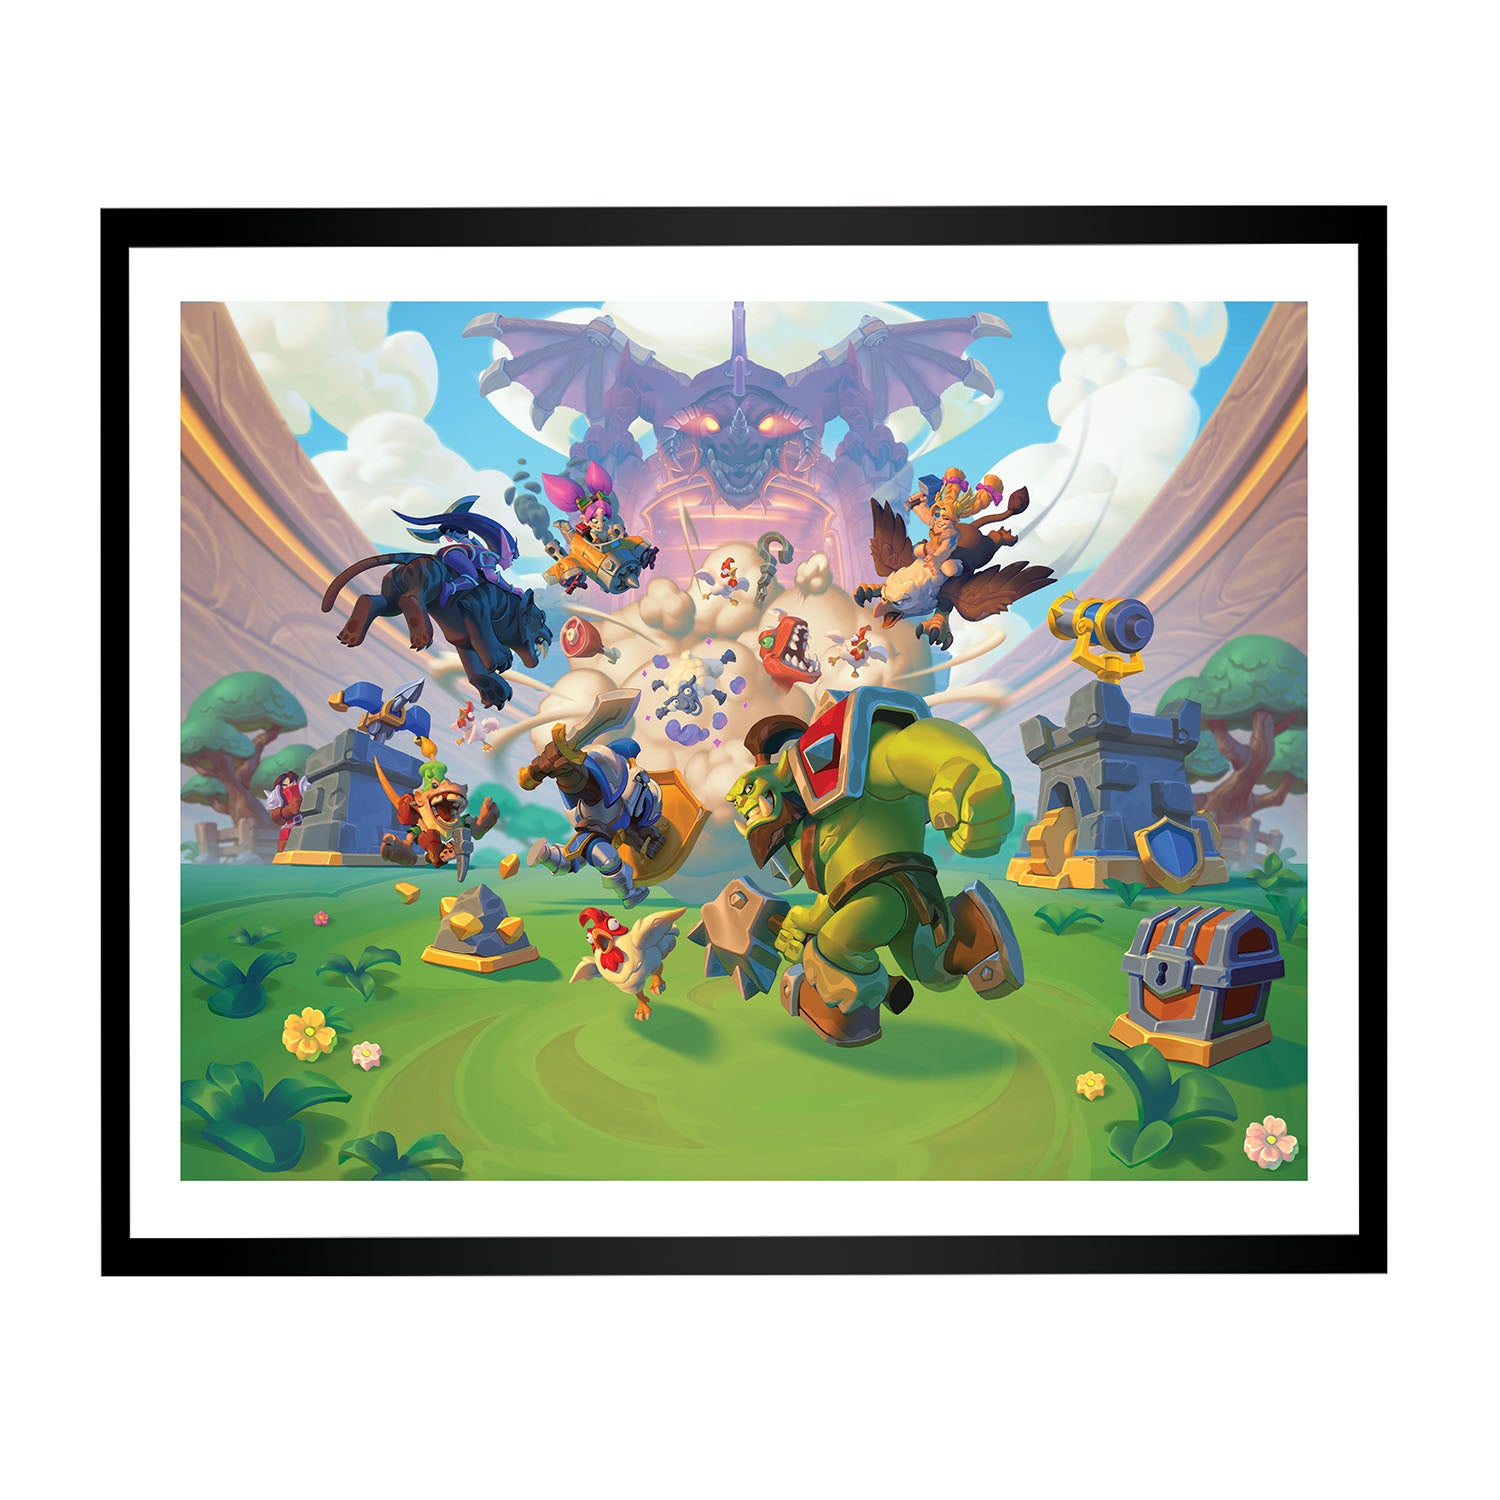 Warcraft Arclight Rumble 16 x 20in  Framed Print - Front View